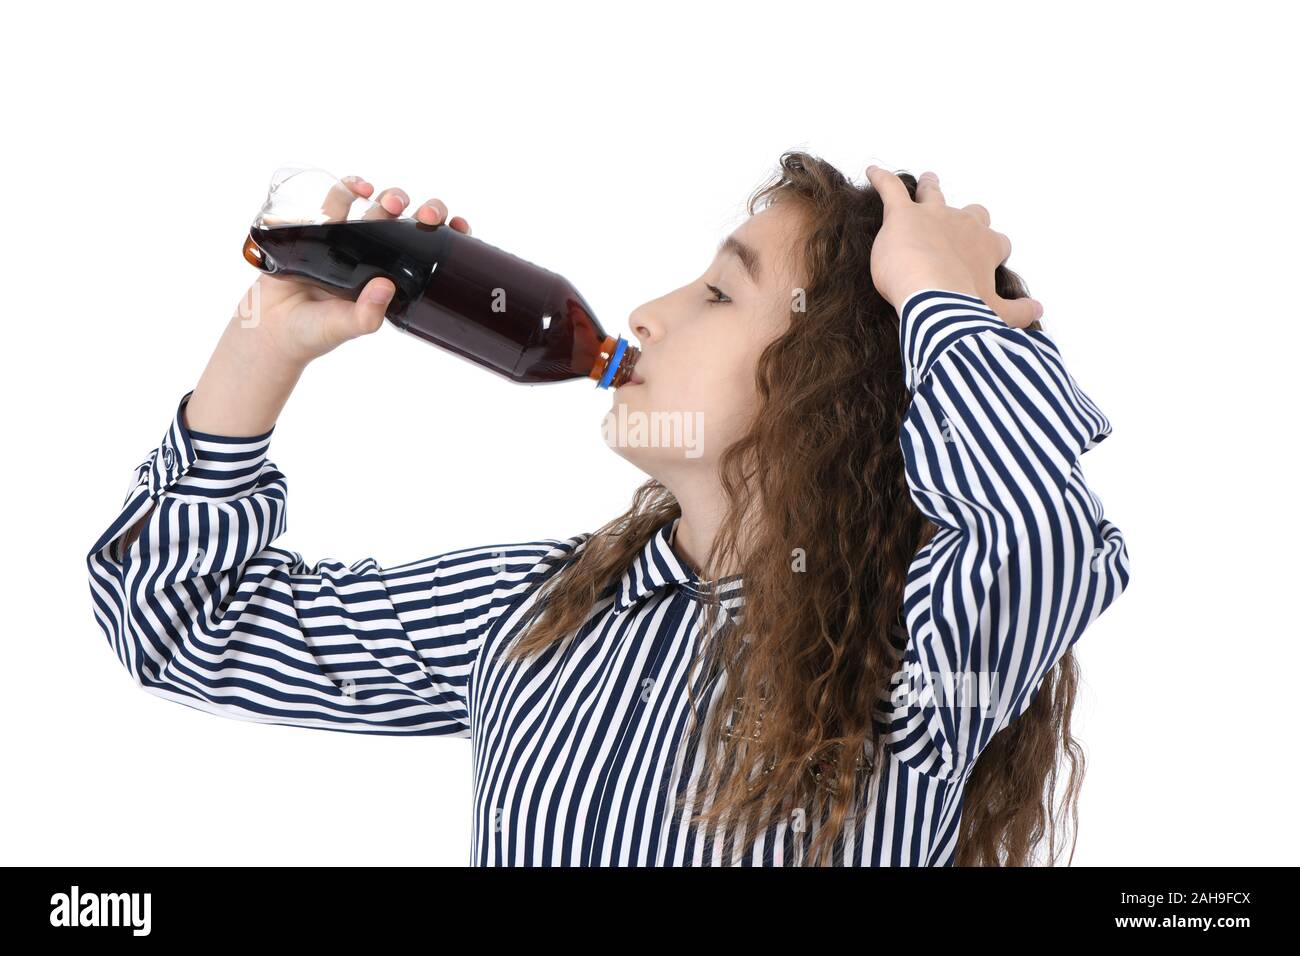 Child drinking Cola from bottle. On white background. High resolution photo. Full depth of field. Stock Photo